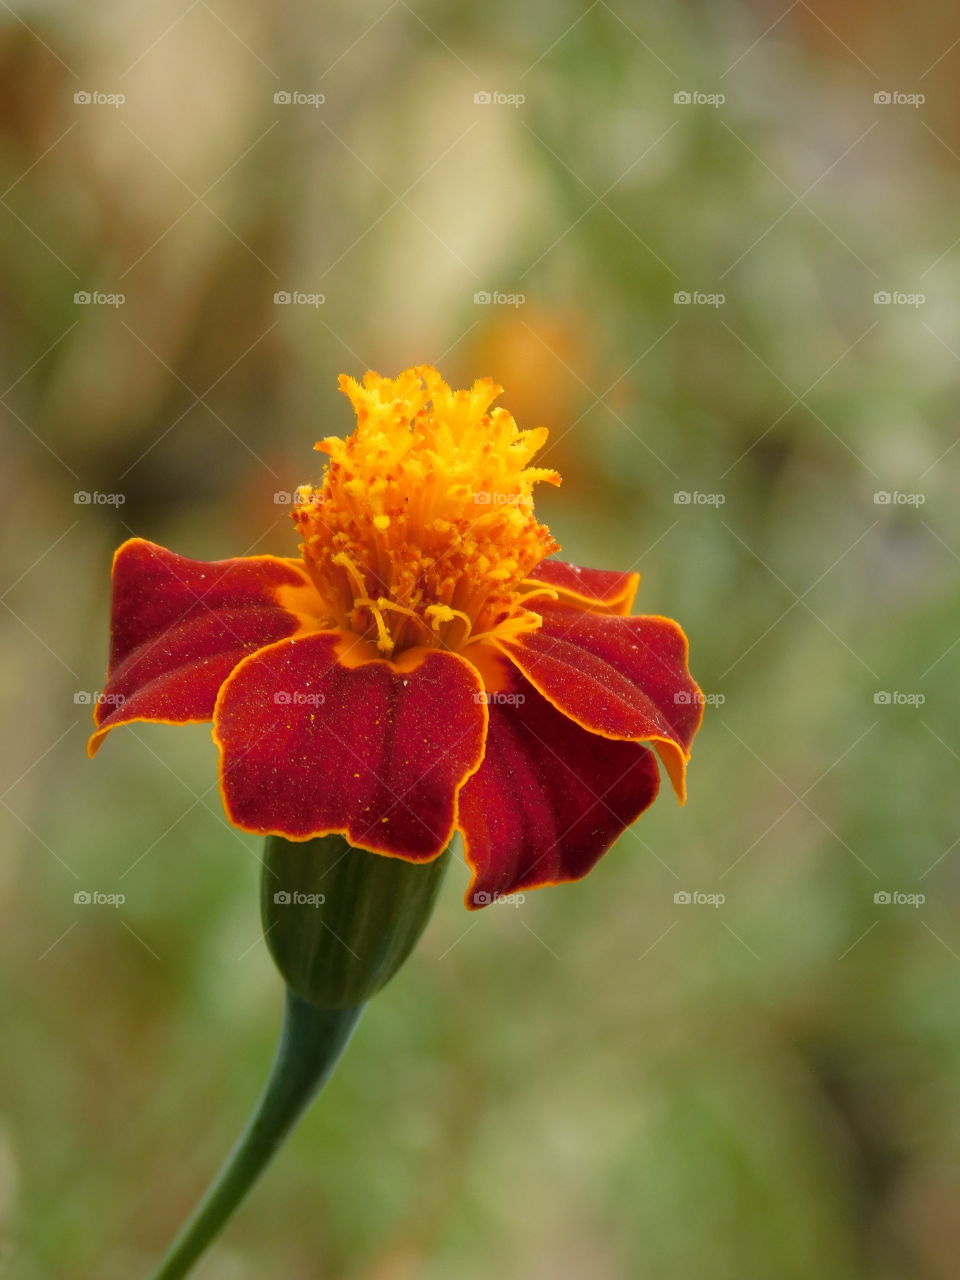 Single Flower-Tagetes erecta, the Mexican marigold or Aztec marigold, is a species of the genus Tagetes native to Mexico. Despite its being native to the Americas, it is often called African marigold. In Mexico, this plant is found in the wild.